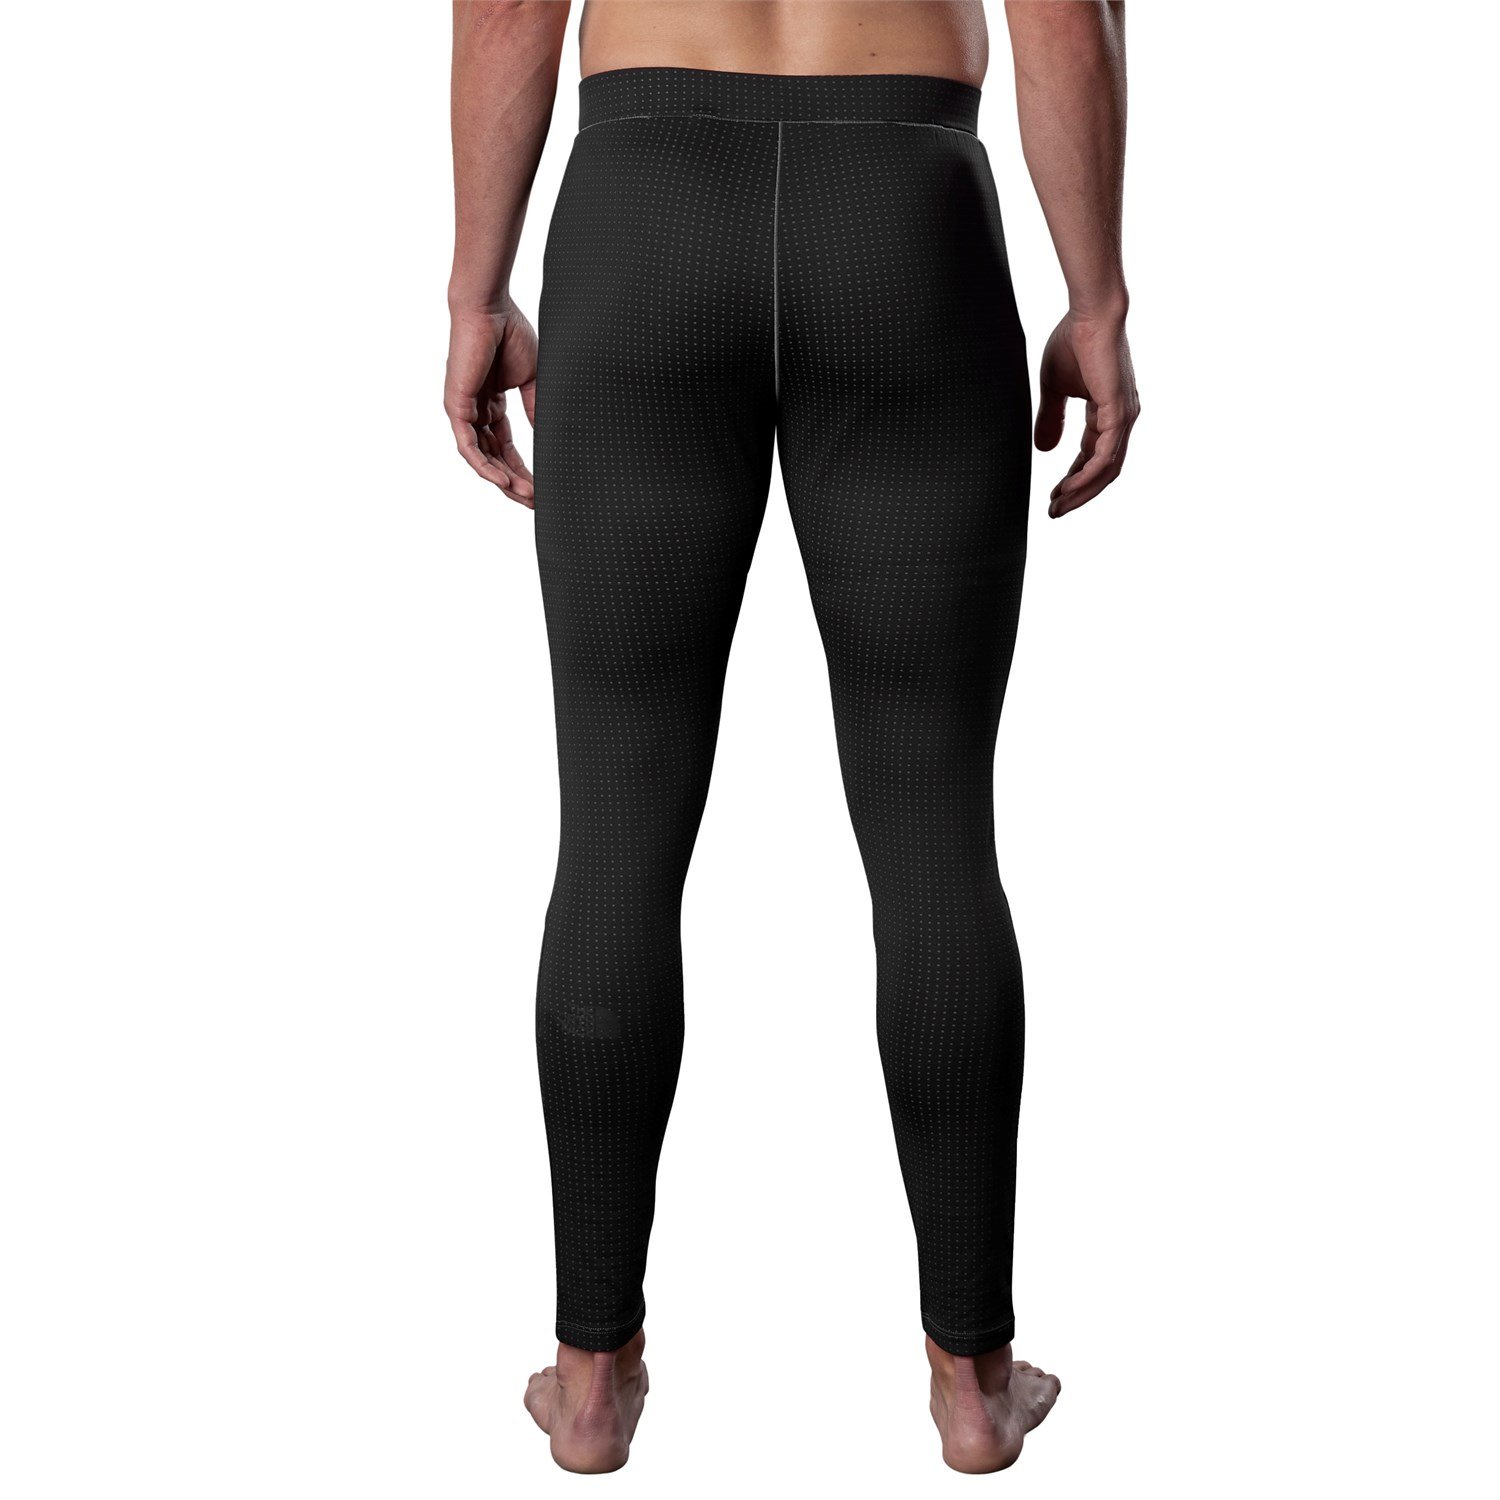 The North Face Summit Series Pro 120 Tights - Men's